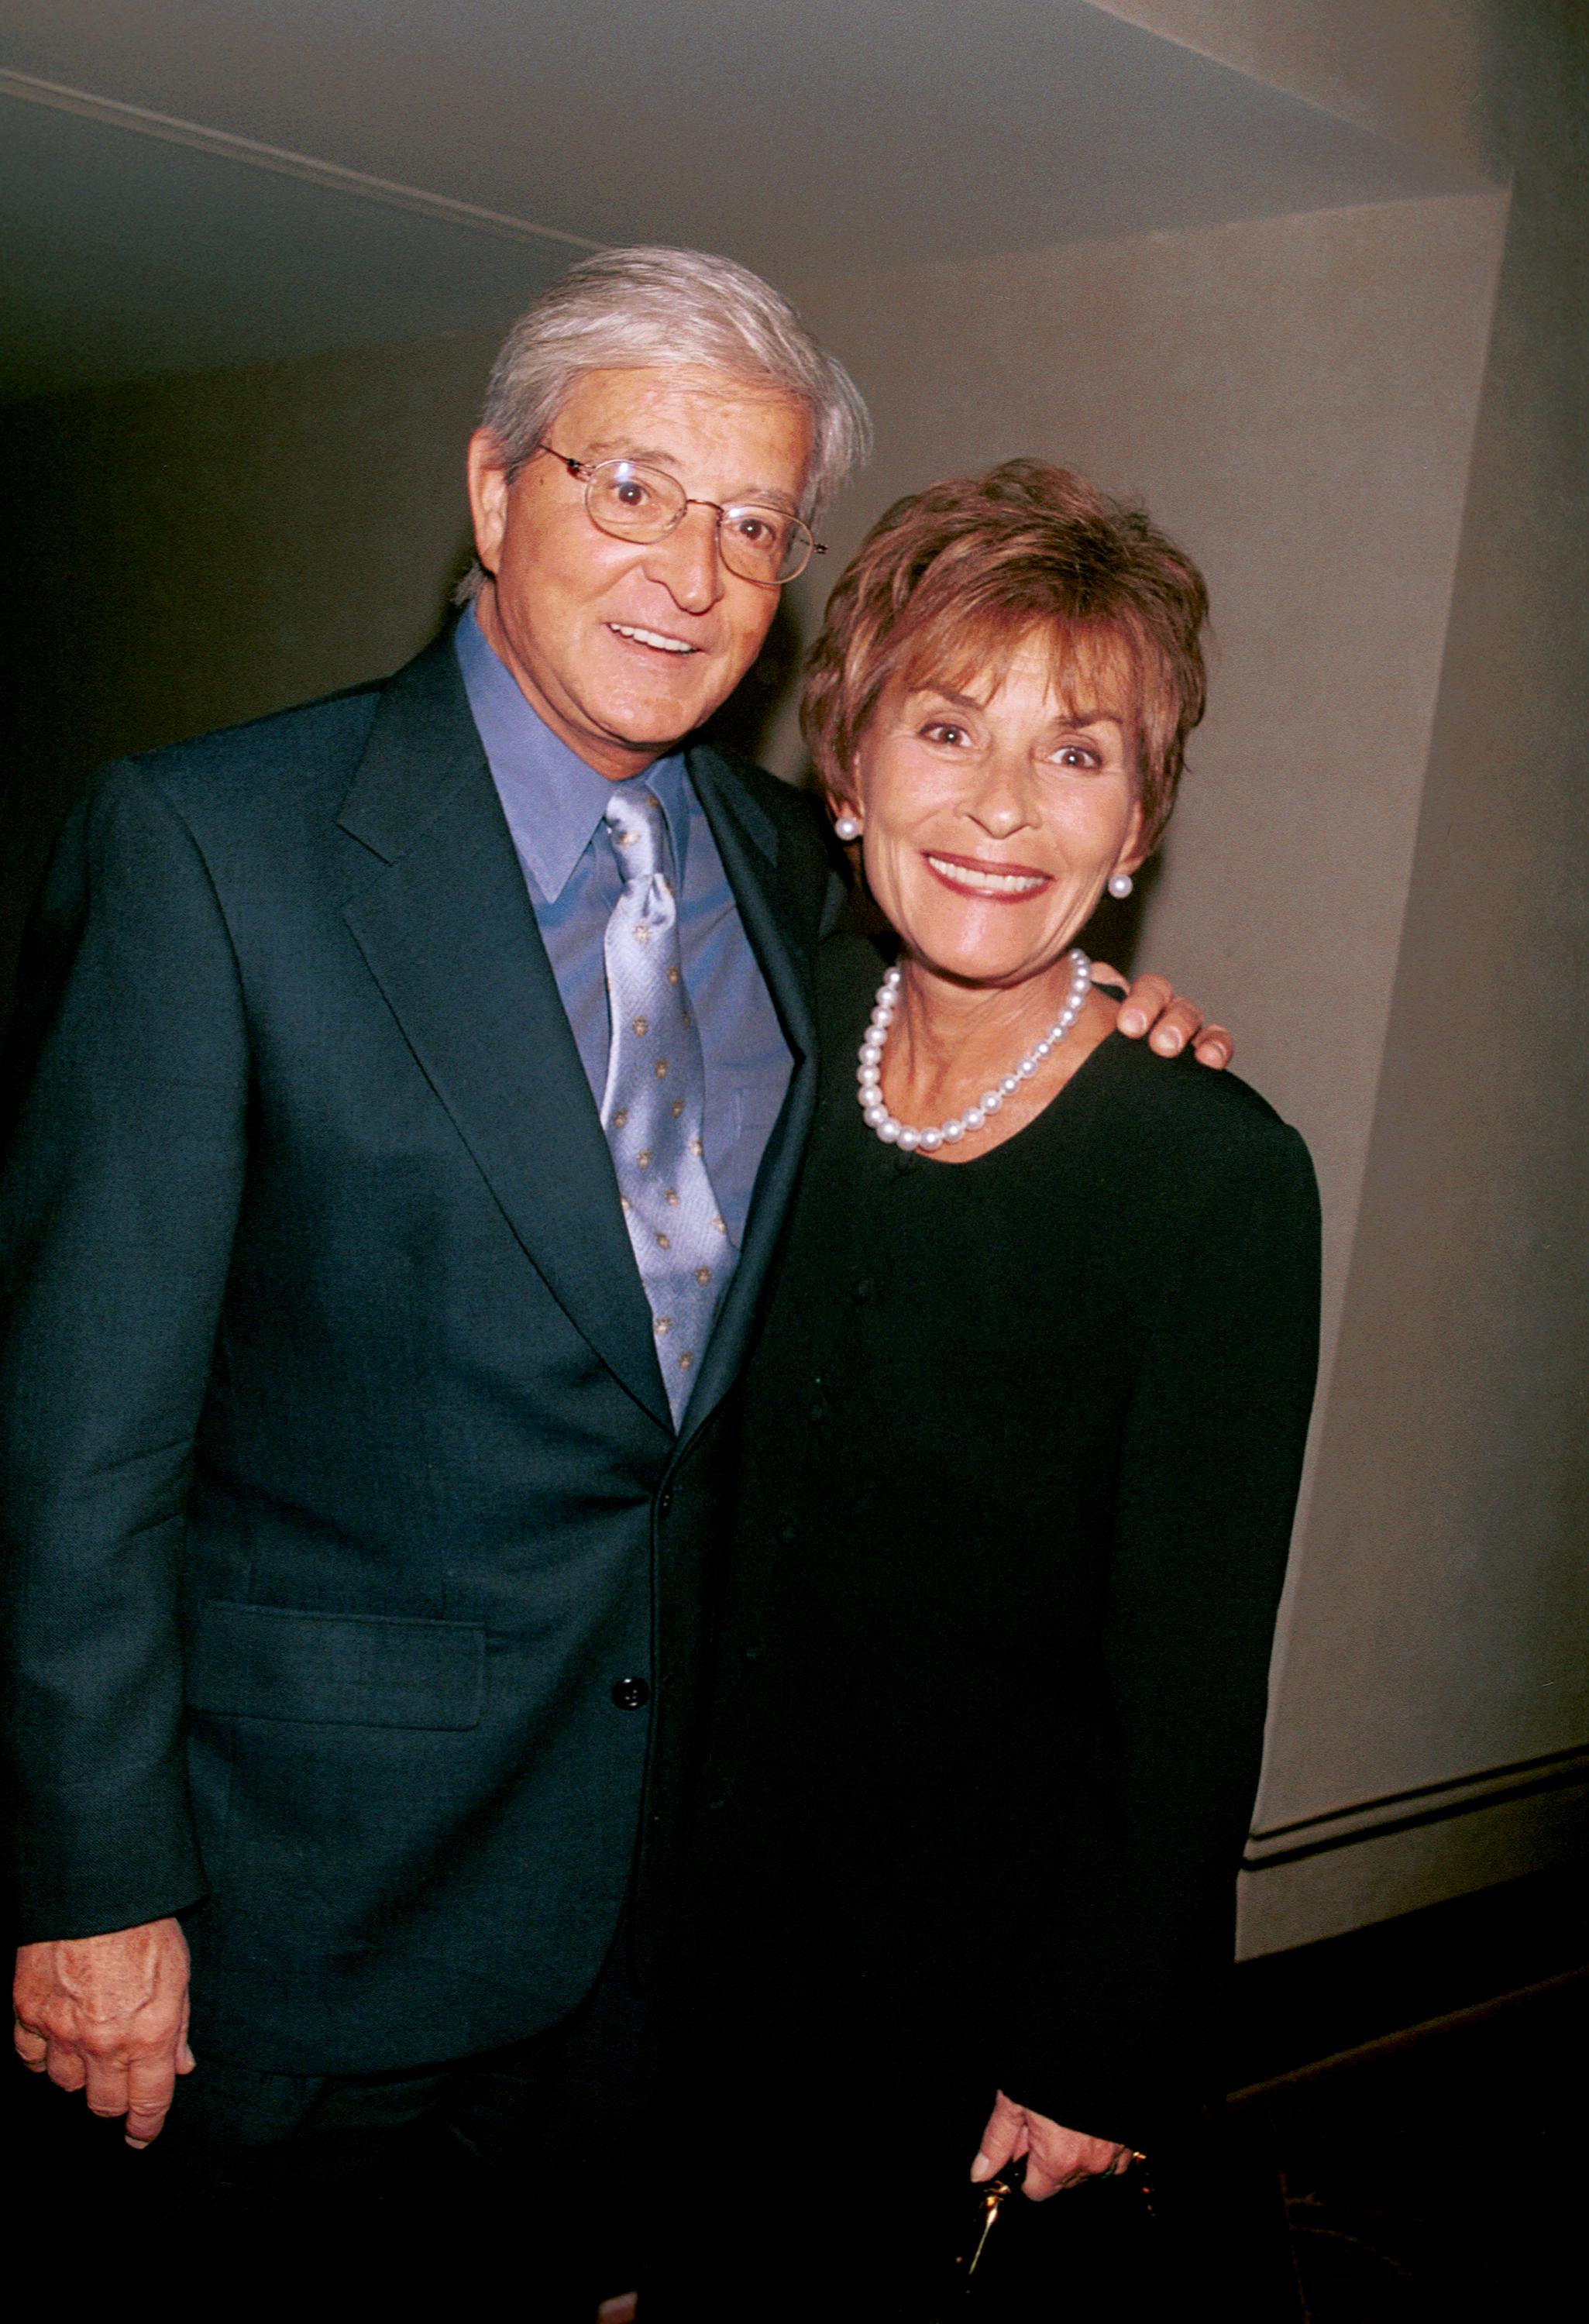 Judges Jerry and Judy Sheindlin attend Merv Griffin's Coconut Club for a special performance by Polly Bergen, on January 13, 2001 in Beverley Hills, California. | Source: Getty Images